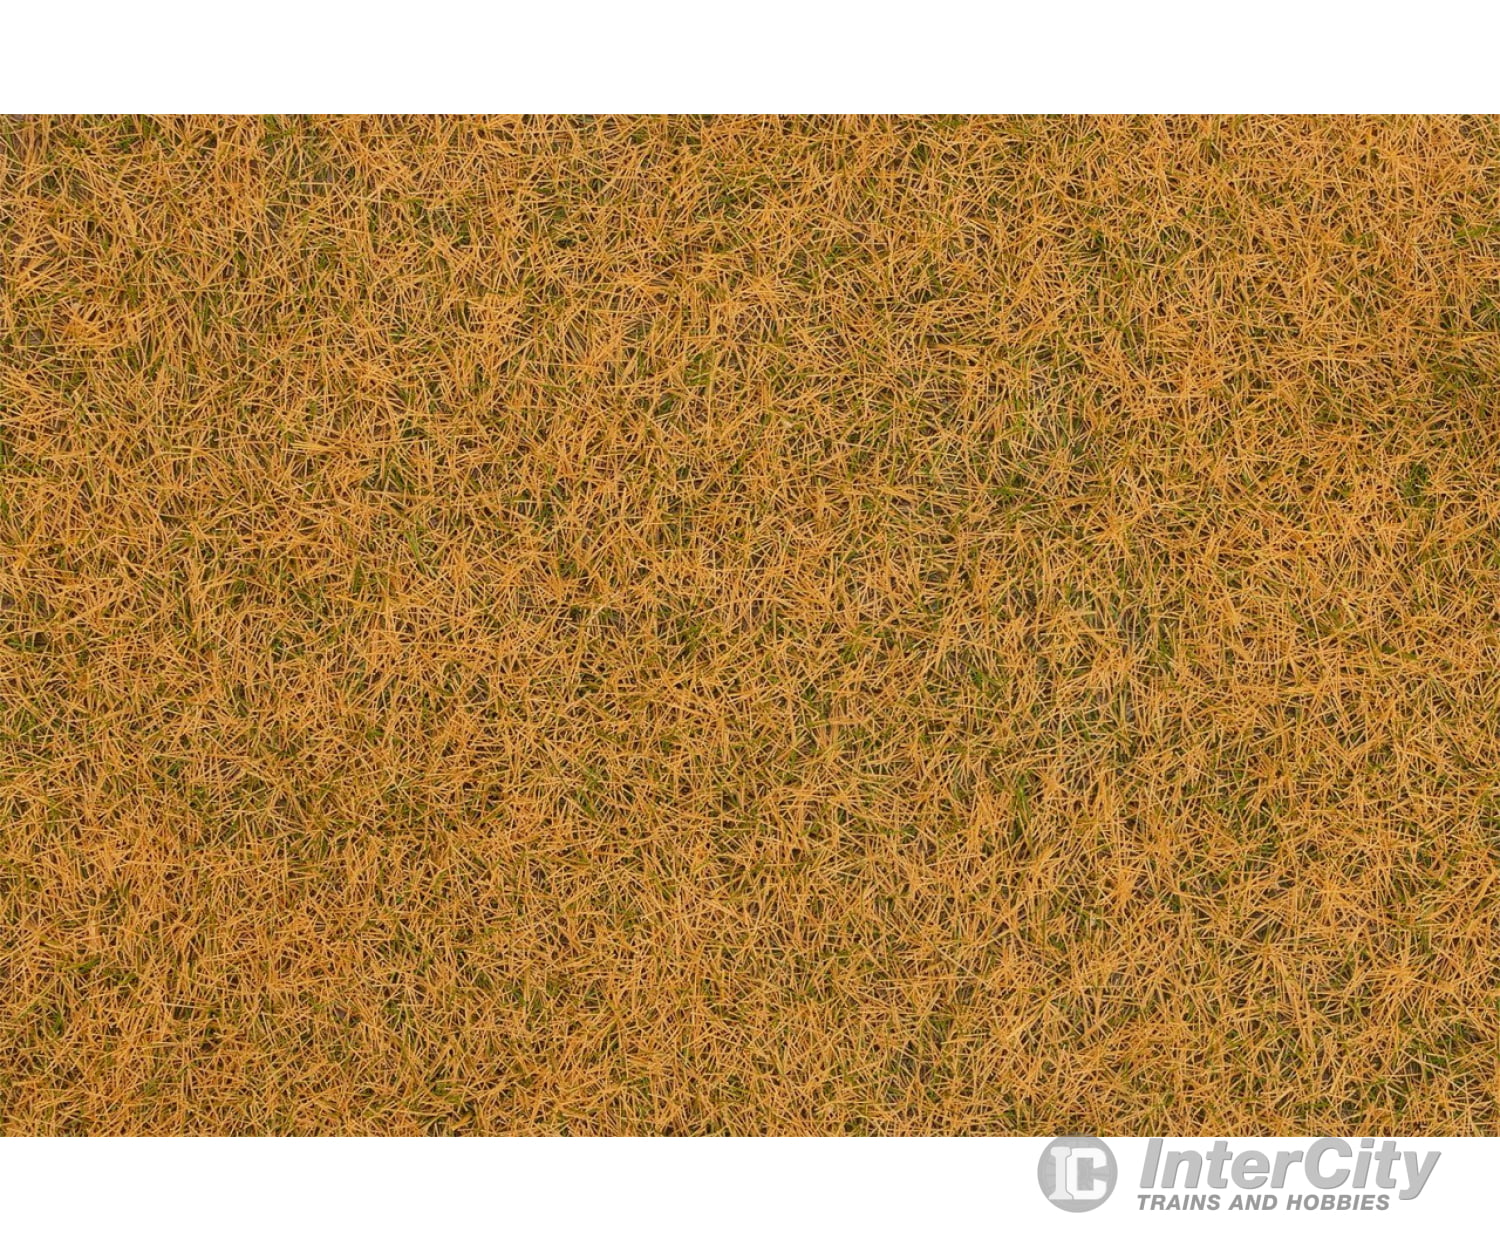 Faller 170260 Ho Tt N Wild Grass Ground Cover Fibres Withered 4 Mm 1 Kg Static Grass & Applicators